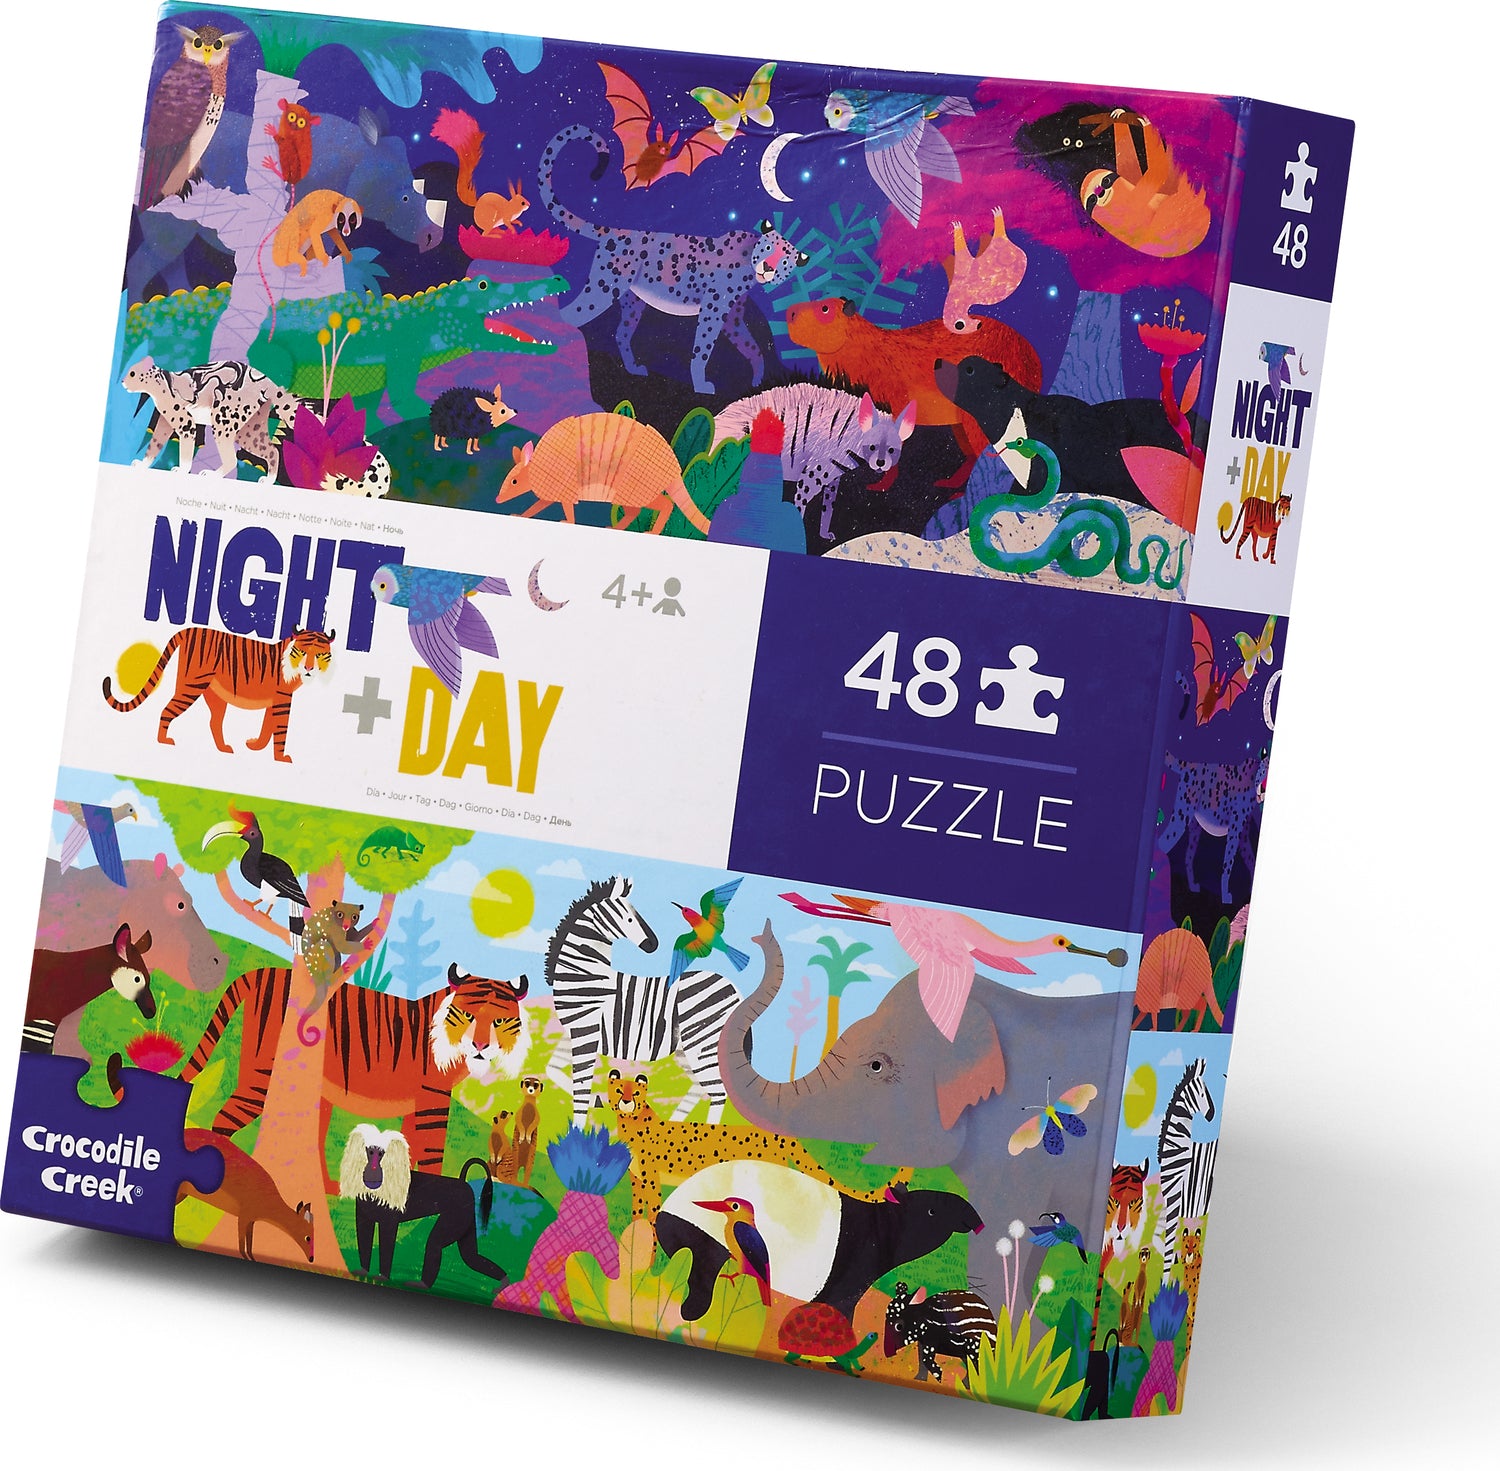 Night + Day Opposite Puzzles (48pc)